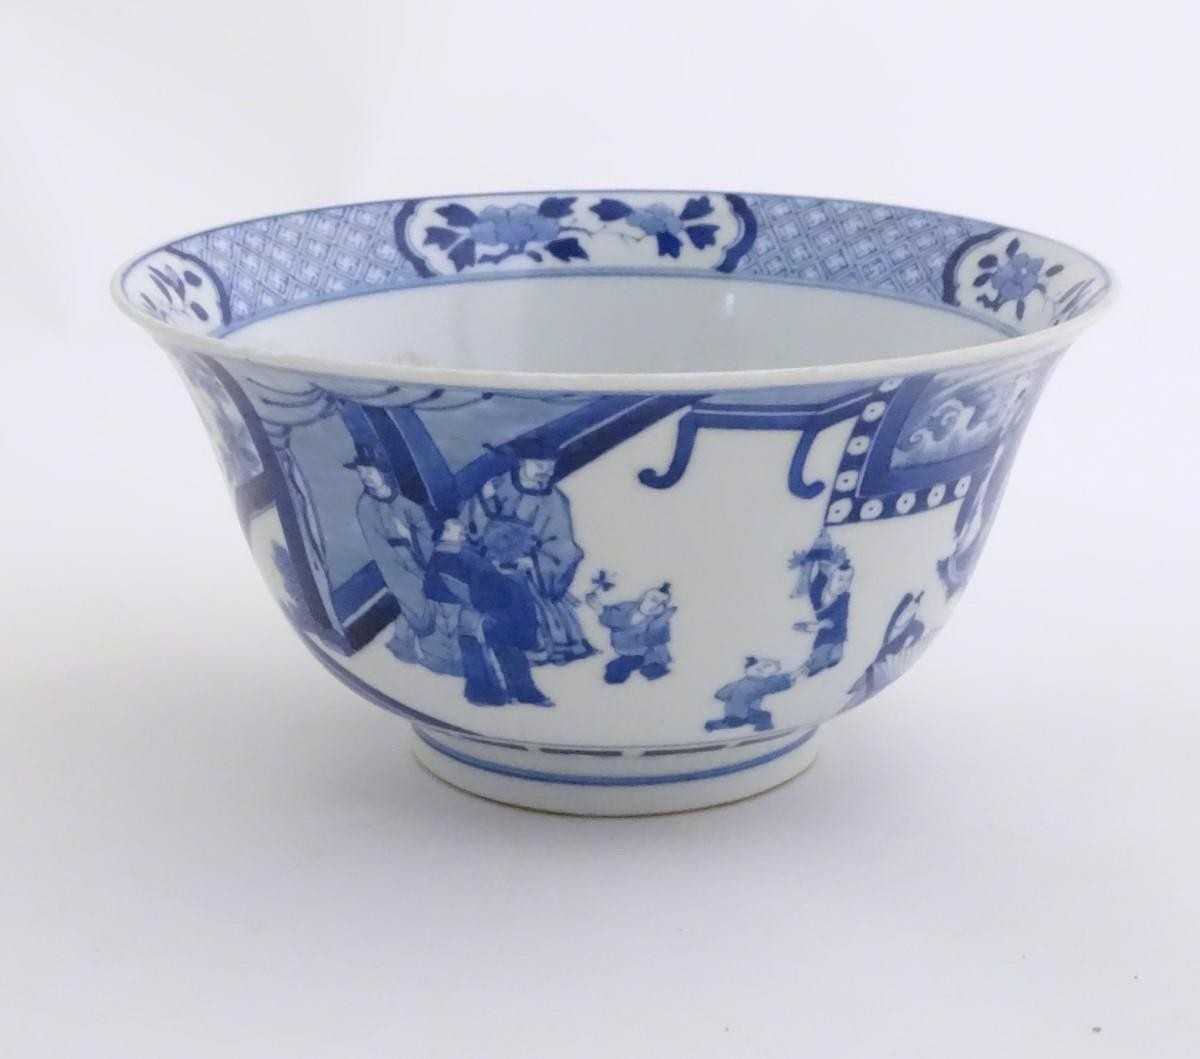 A Chinese blue and white footed bowl with a flared rim, decorated with a scene depicting the - Image 2 of 8